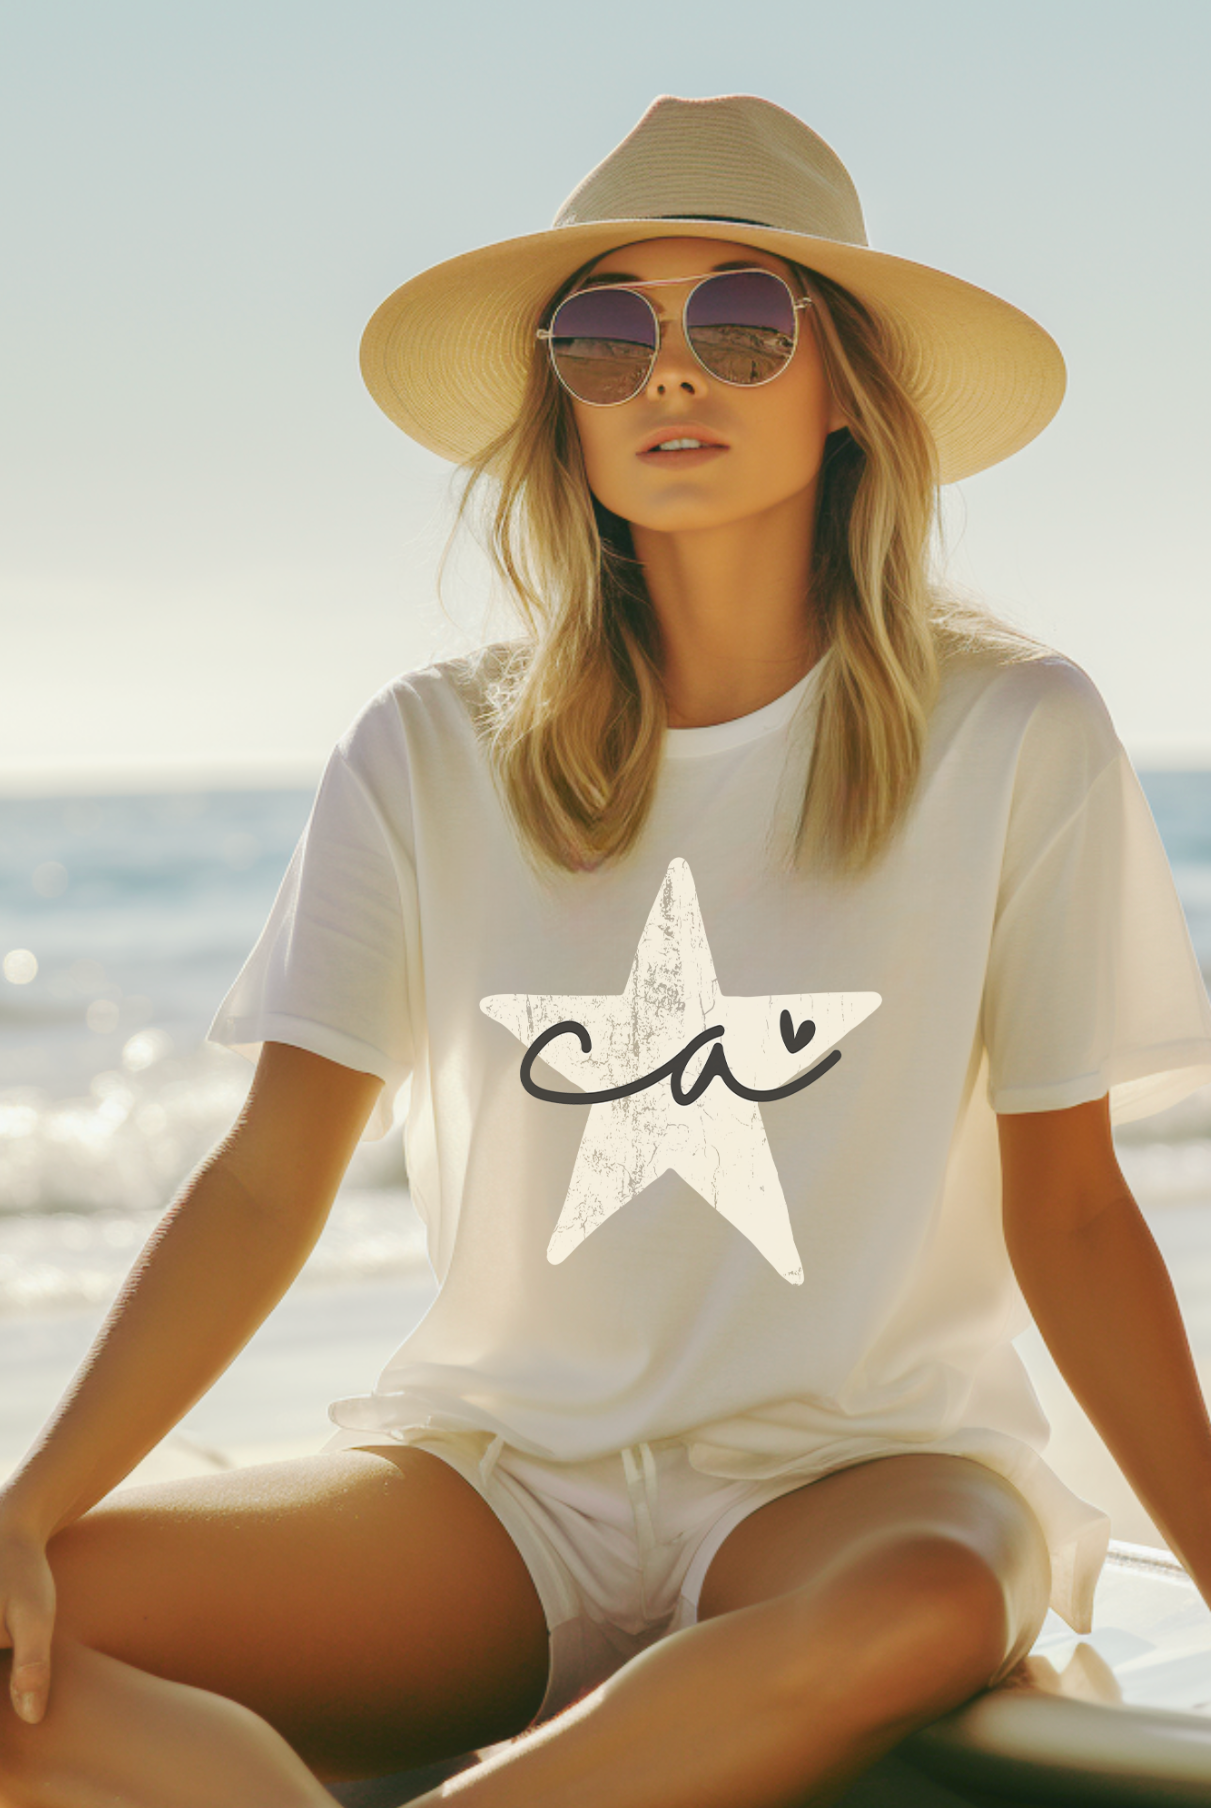 California beach girl, beach vibes vintage coastal girl shirt with ca inside a star with a heart on it. Shirt color is cream Bella and Canvas.